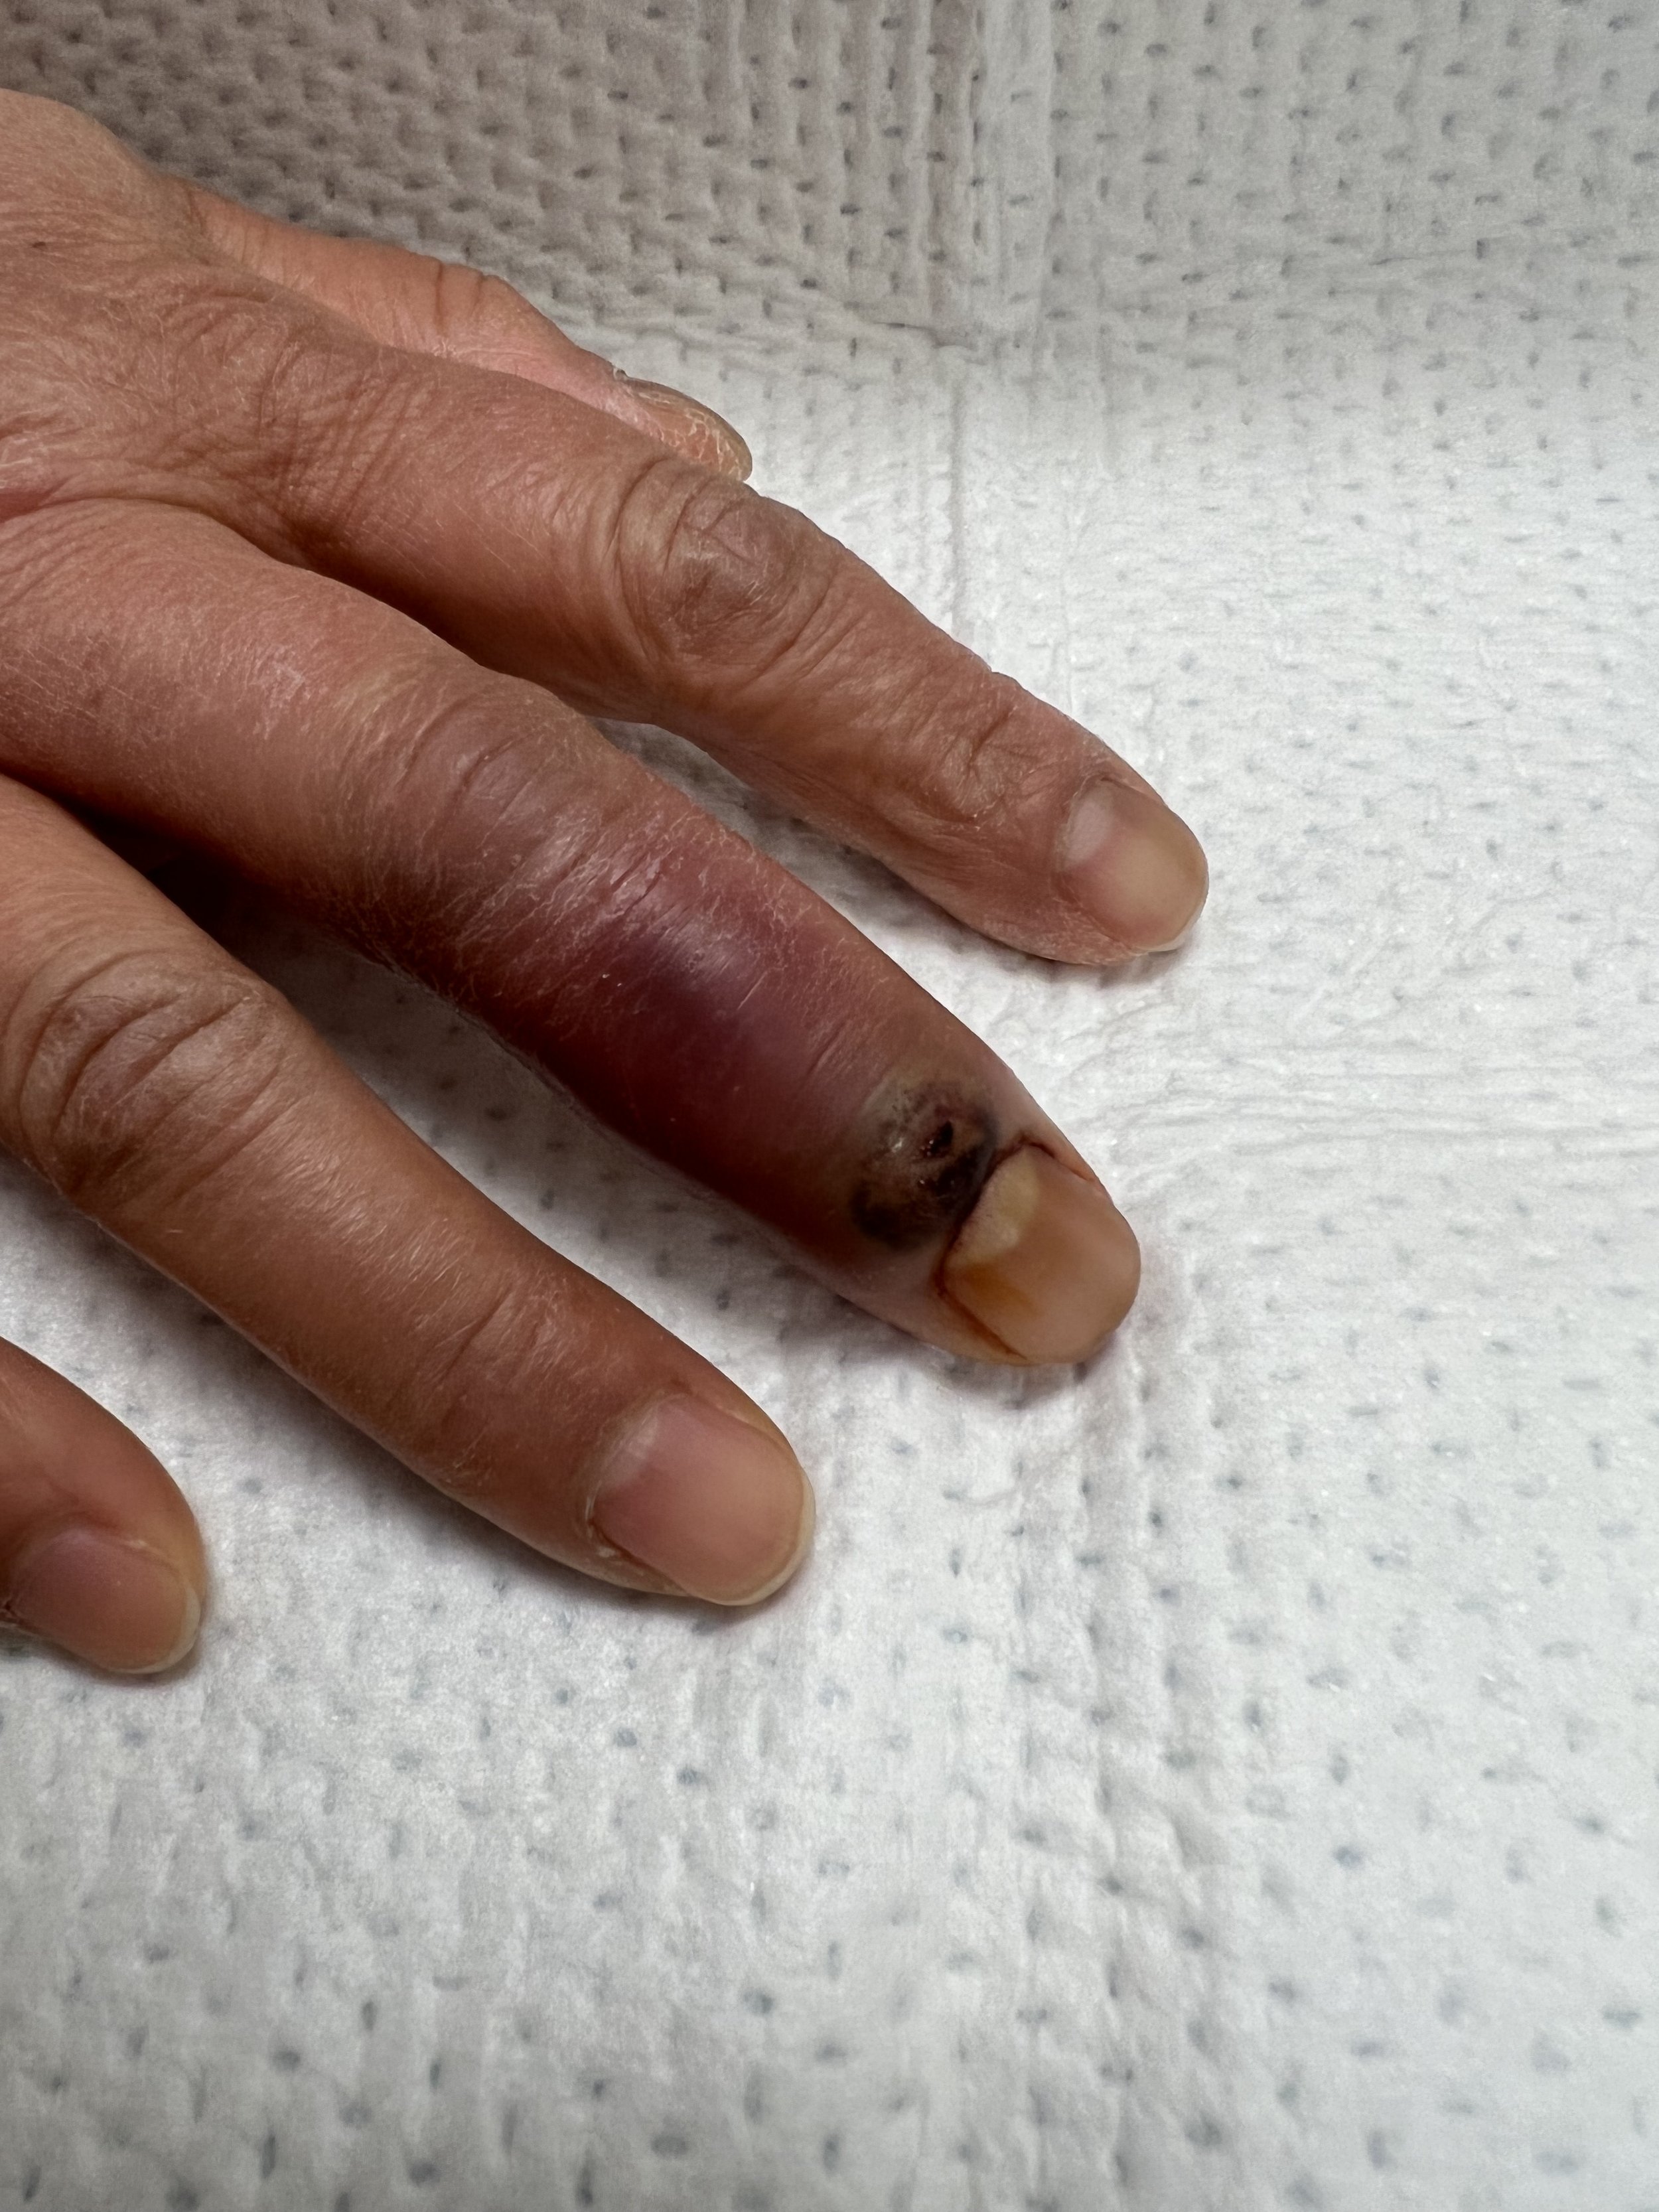 Paronychias are painful infections of the skin around the nails, which... |  TikTok